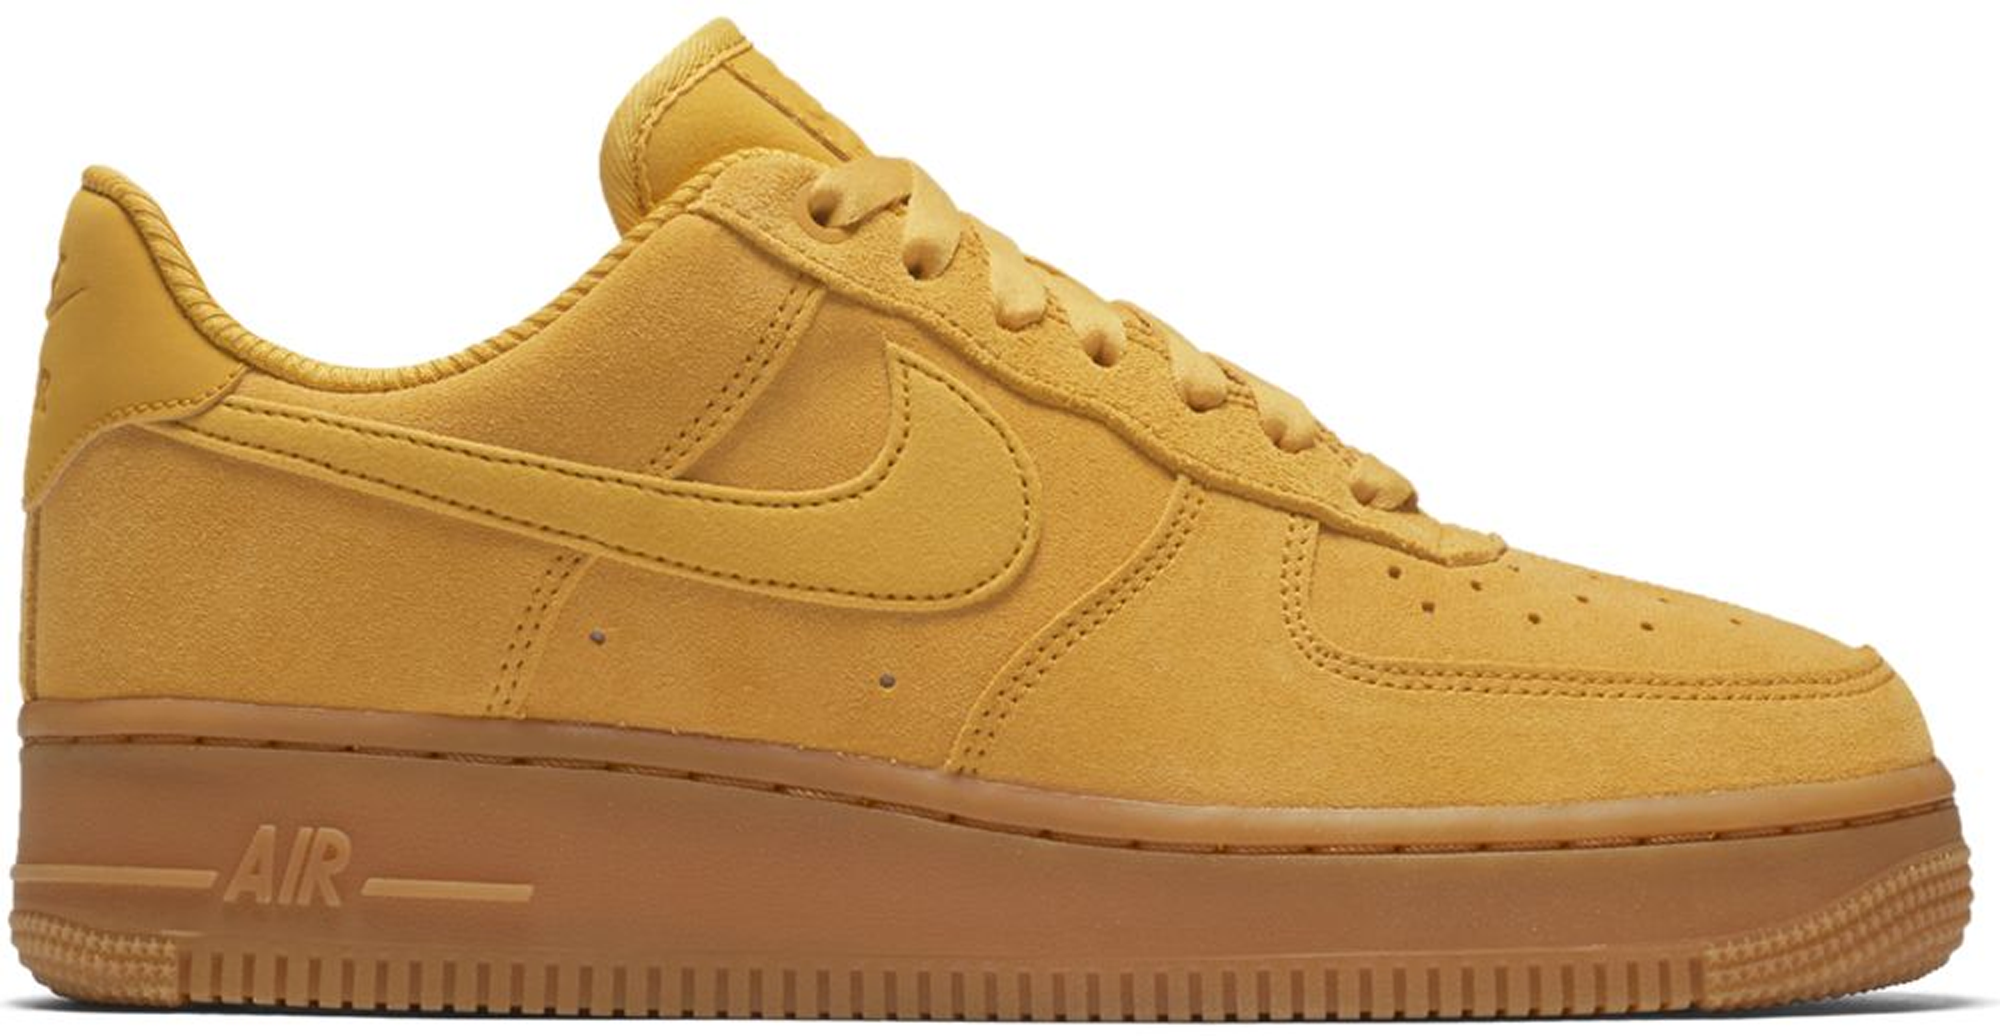 suede yellow air force 1